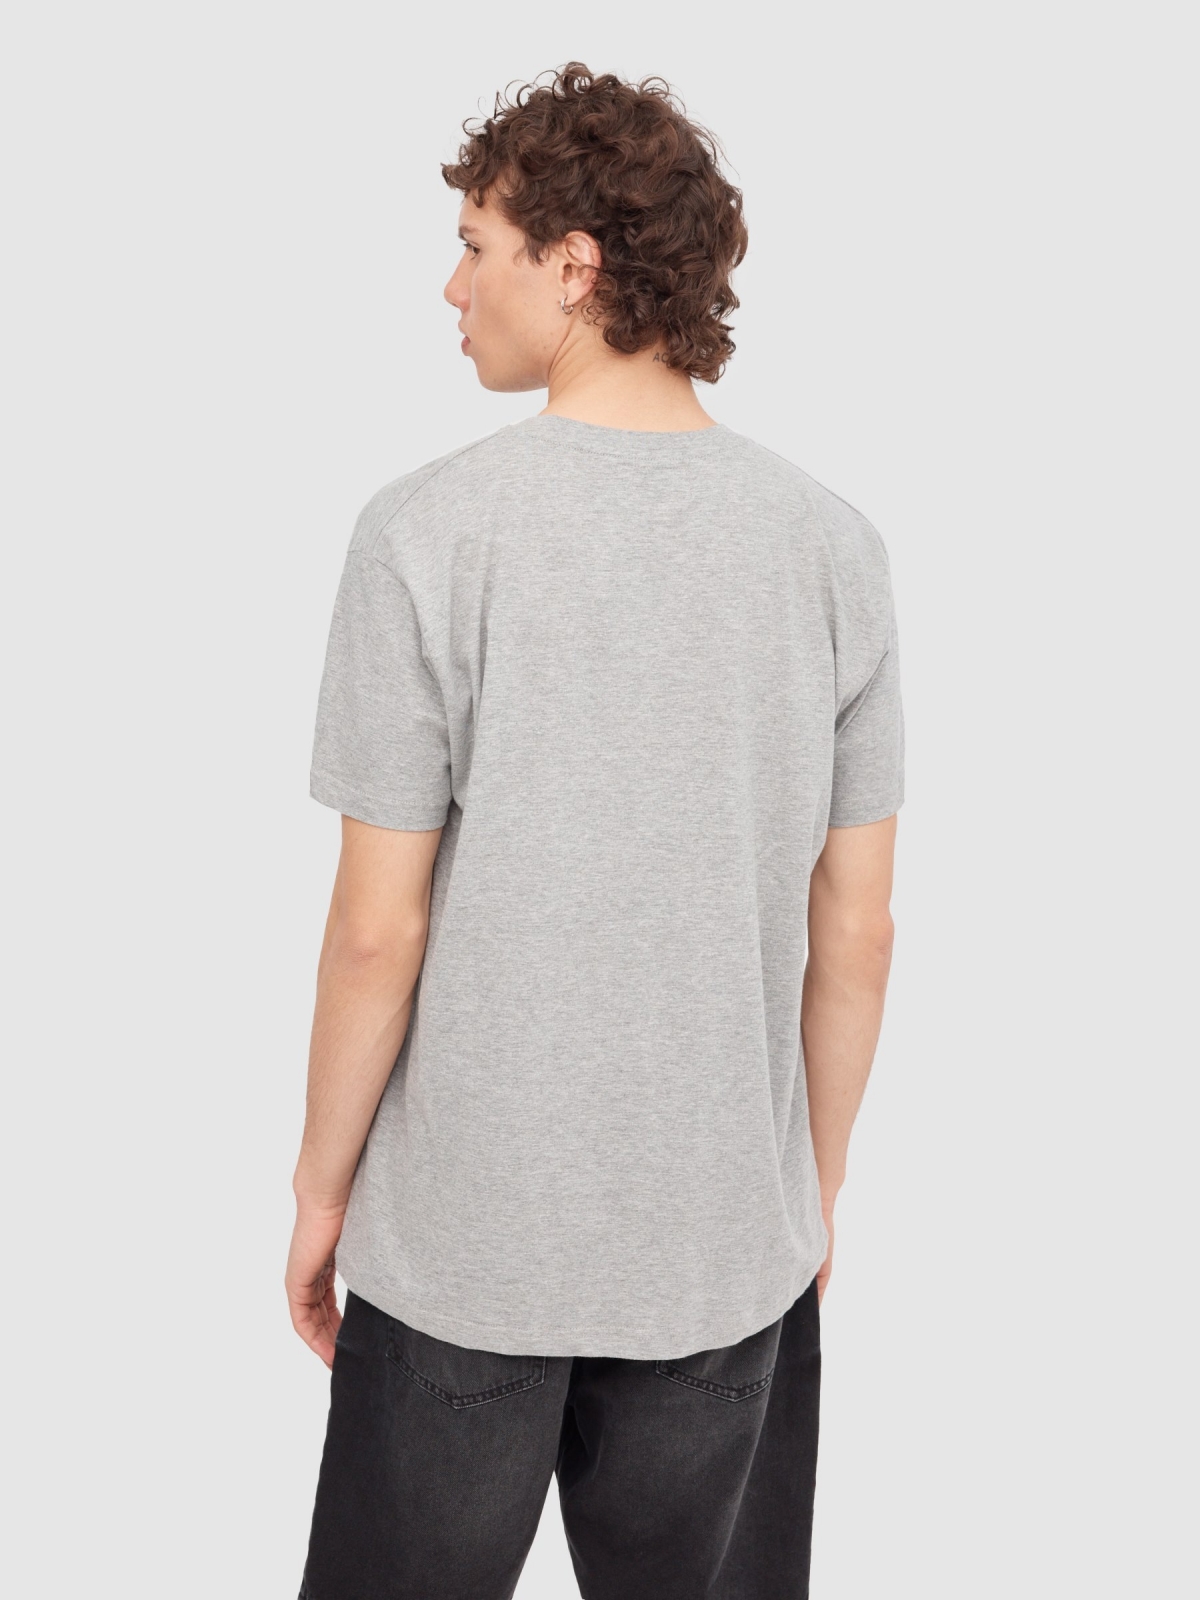 Basic T-shirt grey middle back view